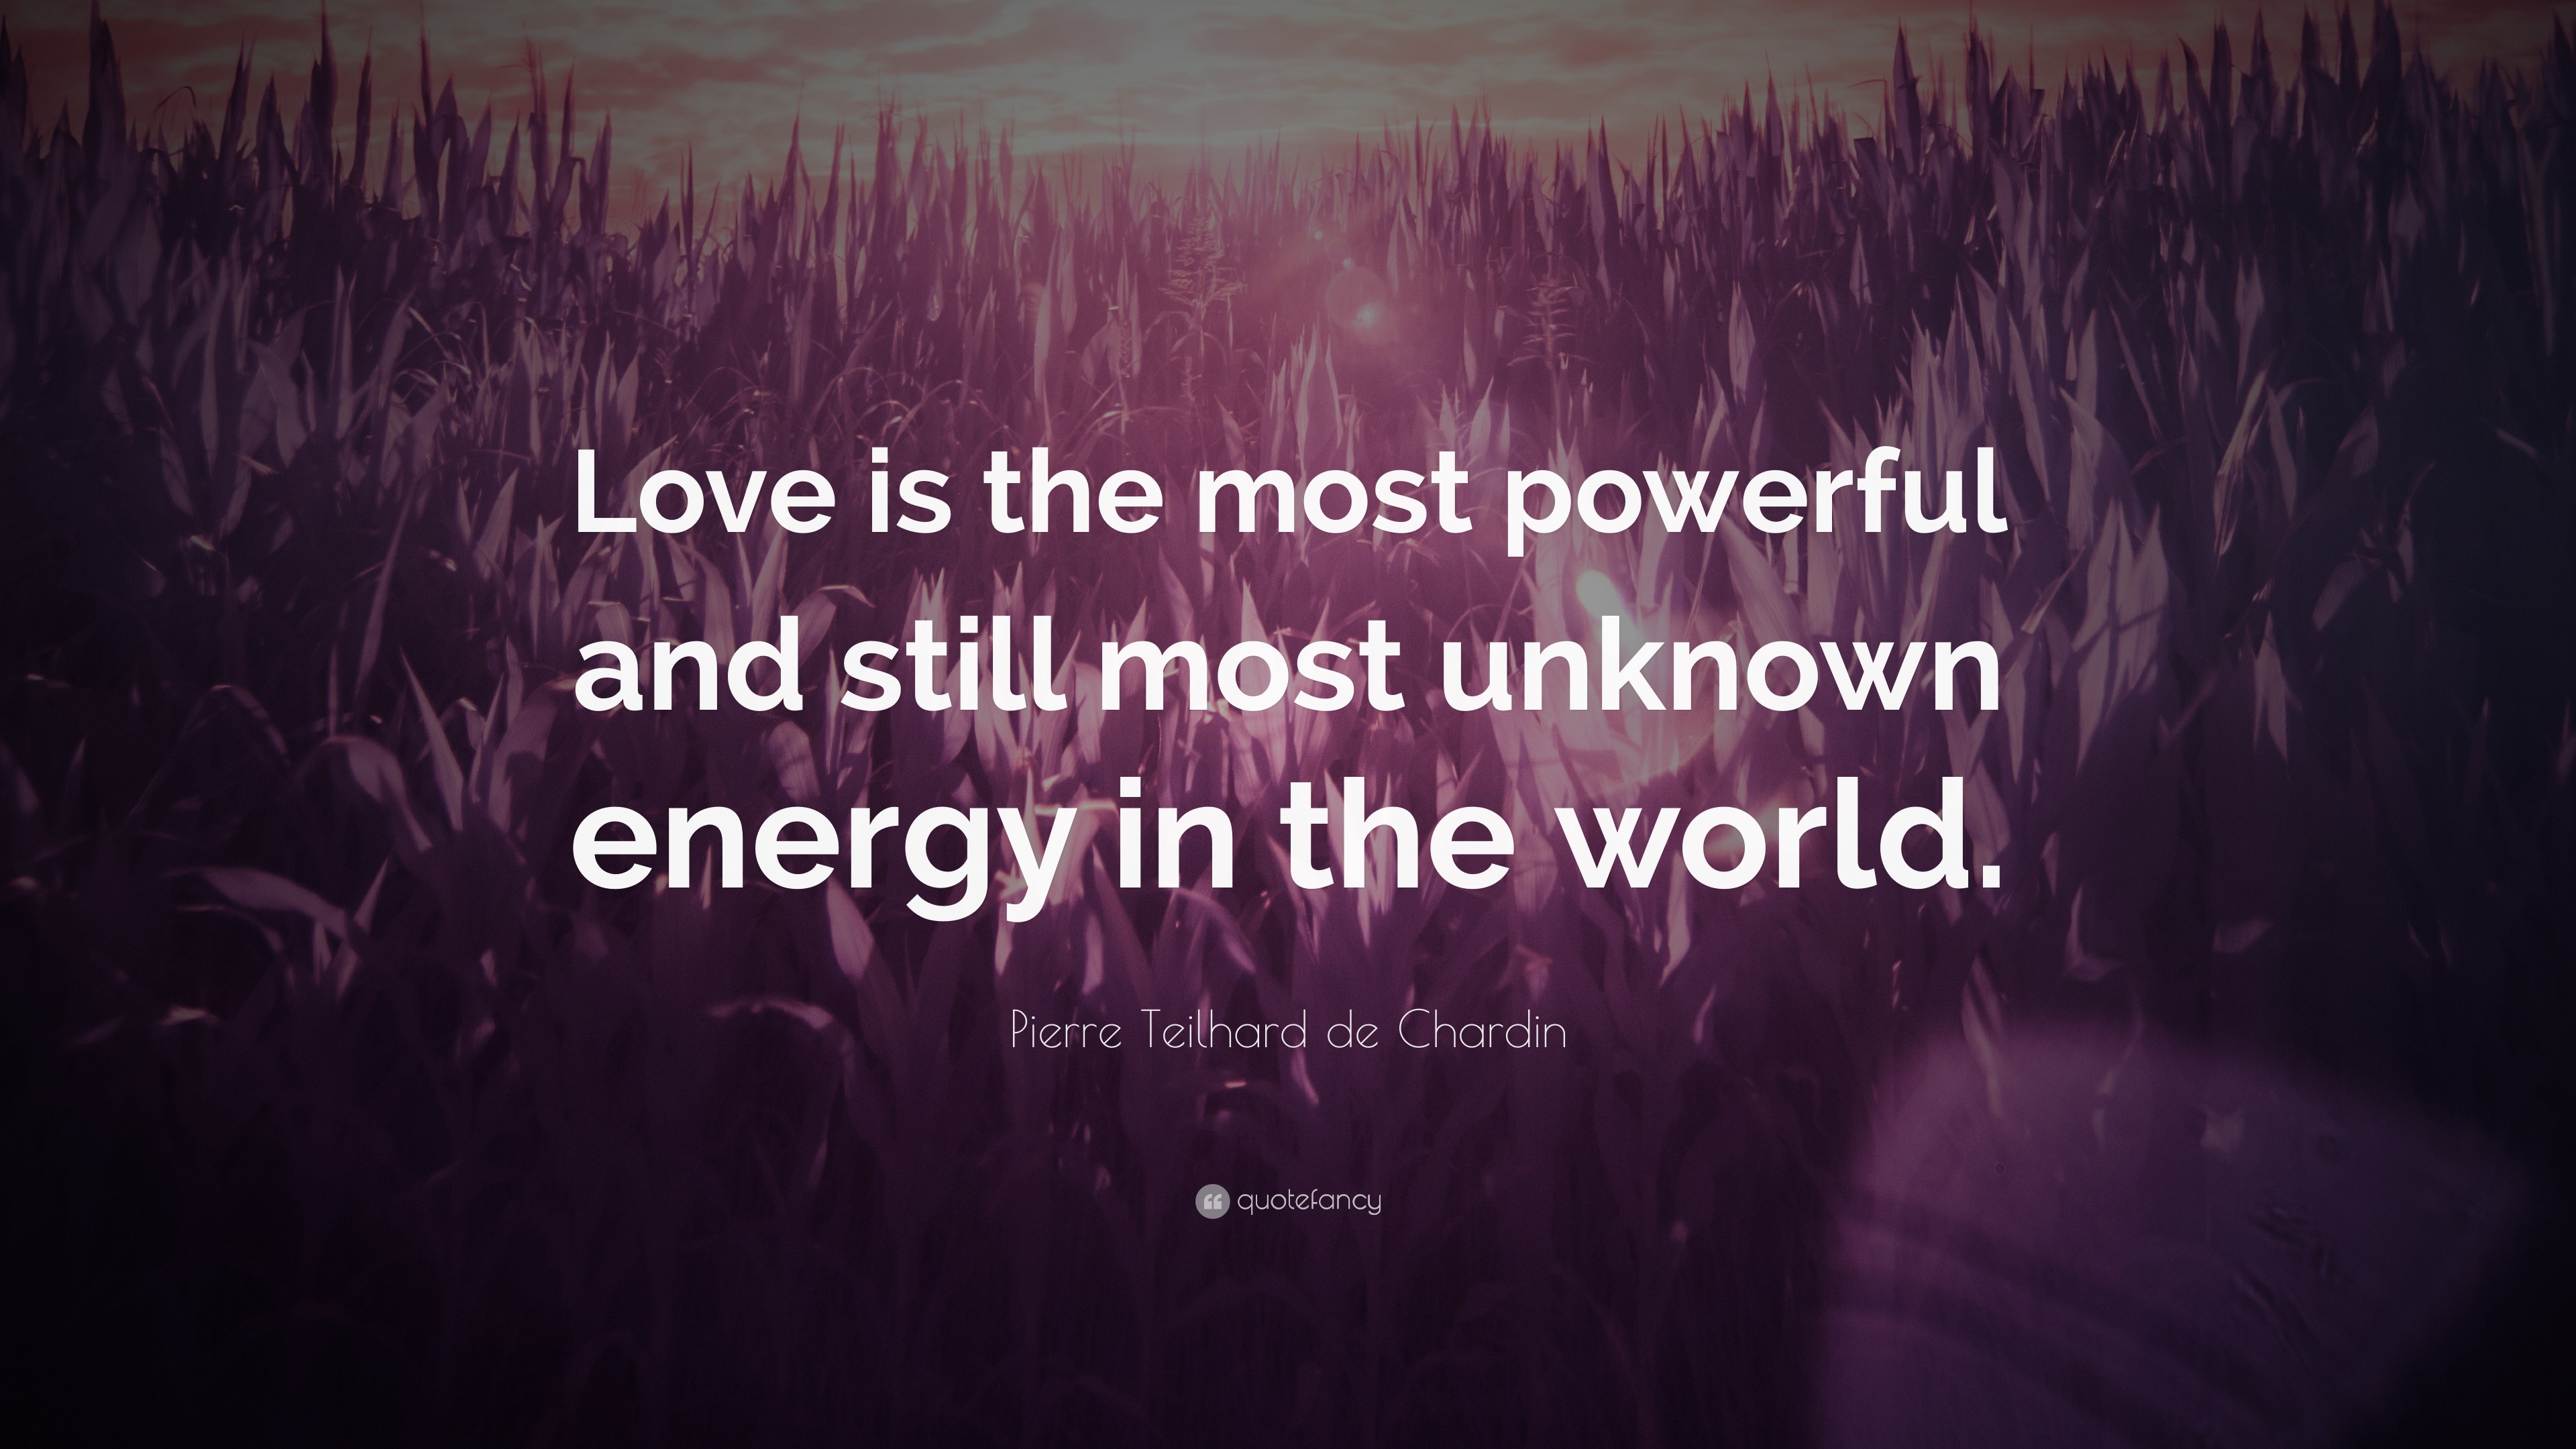 love is power quotes